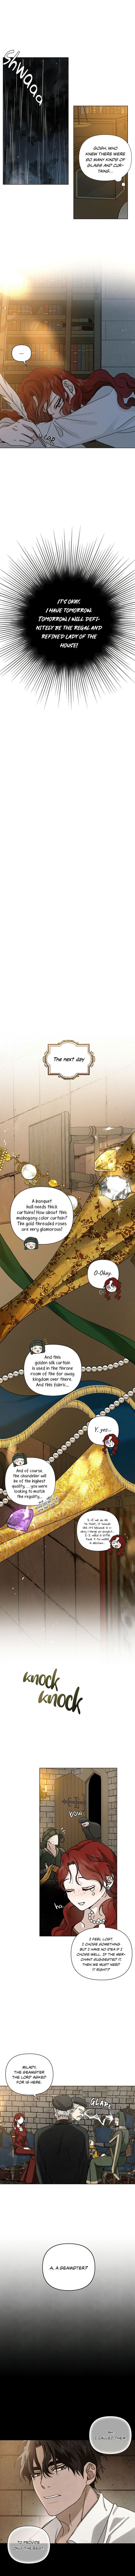 Under the Oak Tree - Chapter 13 Page 4